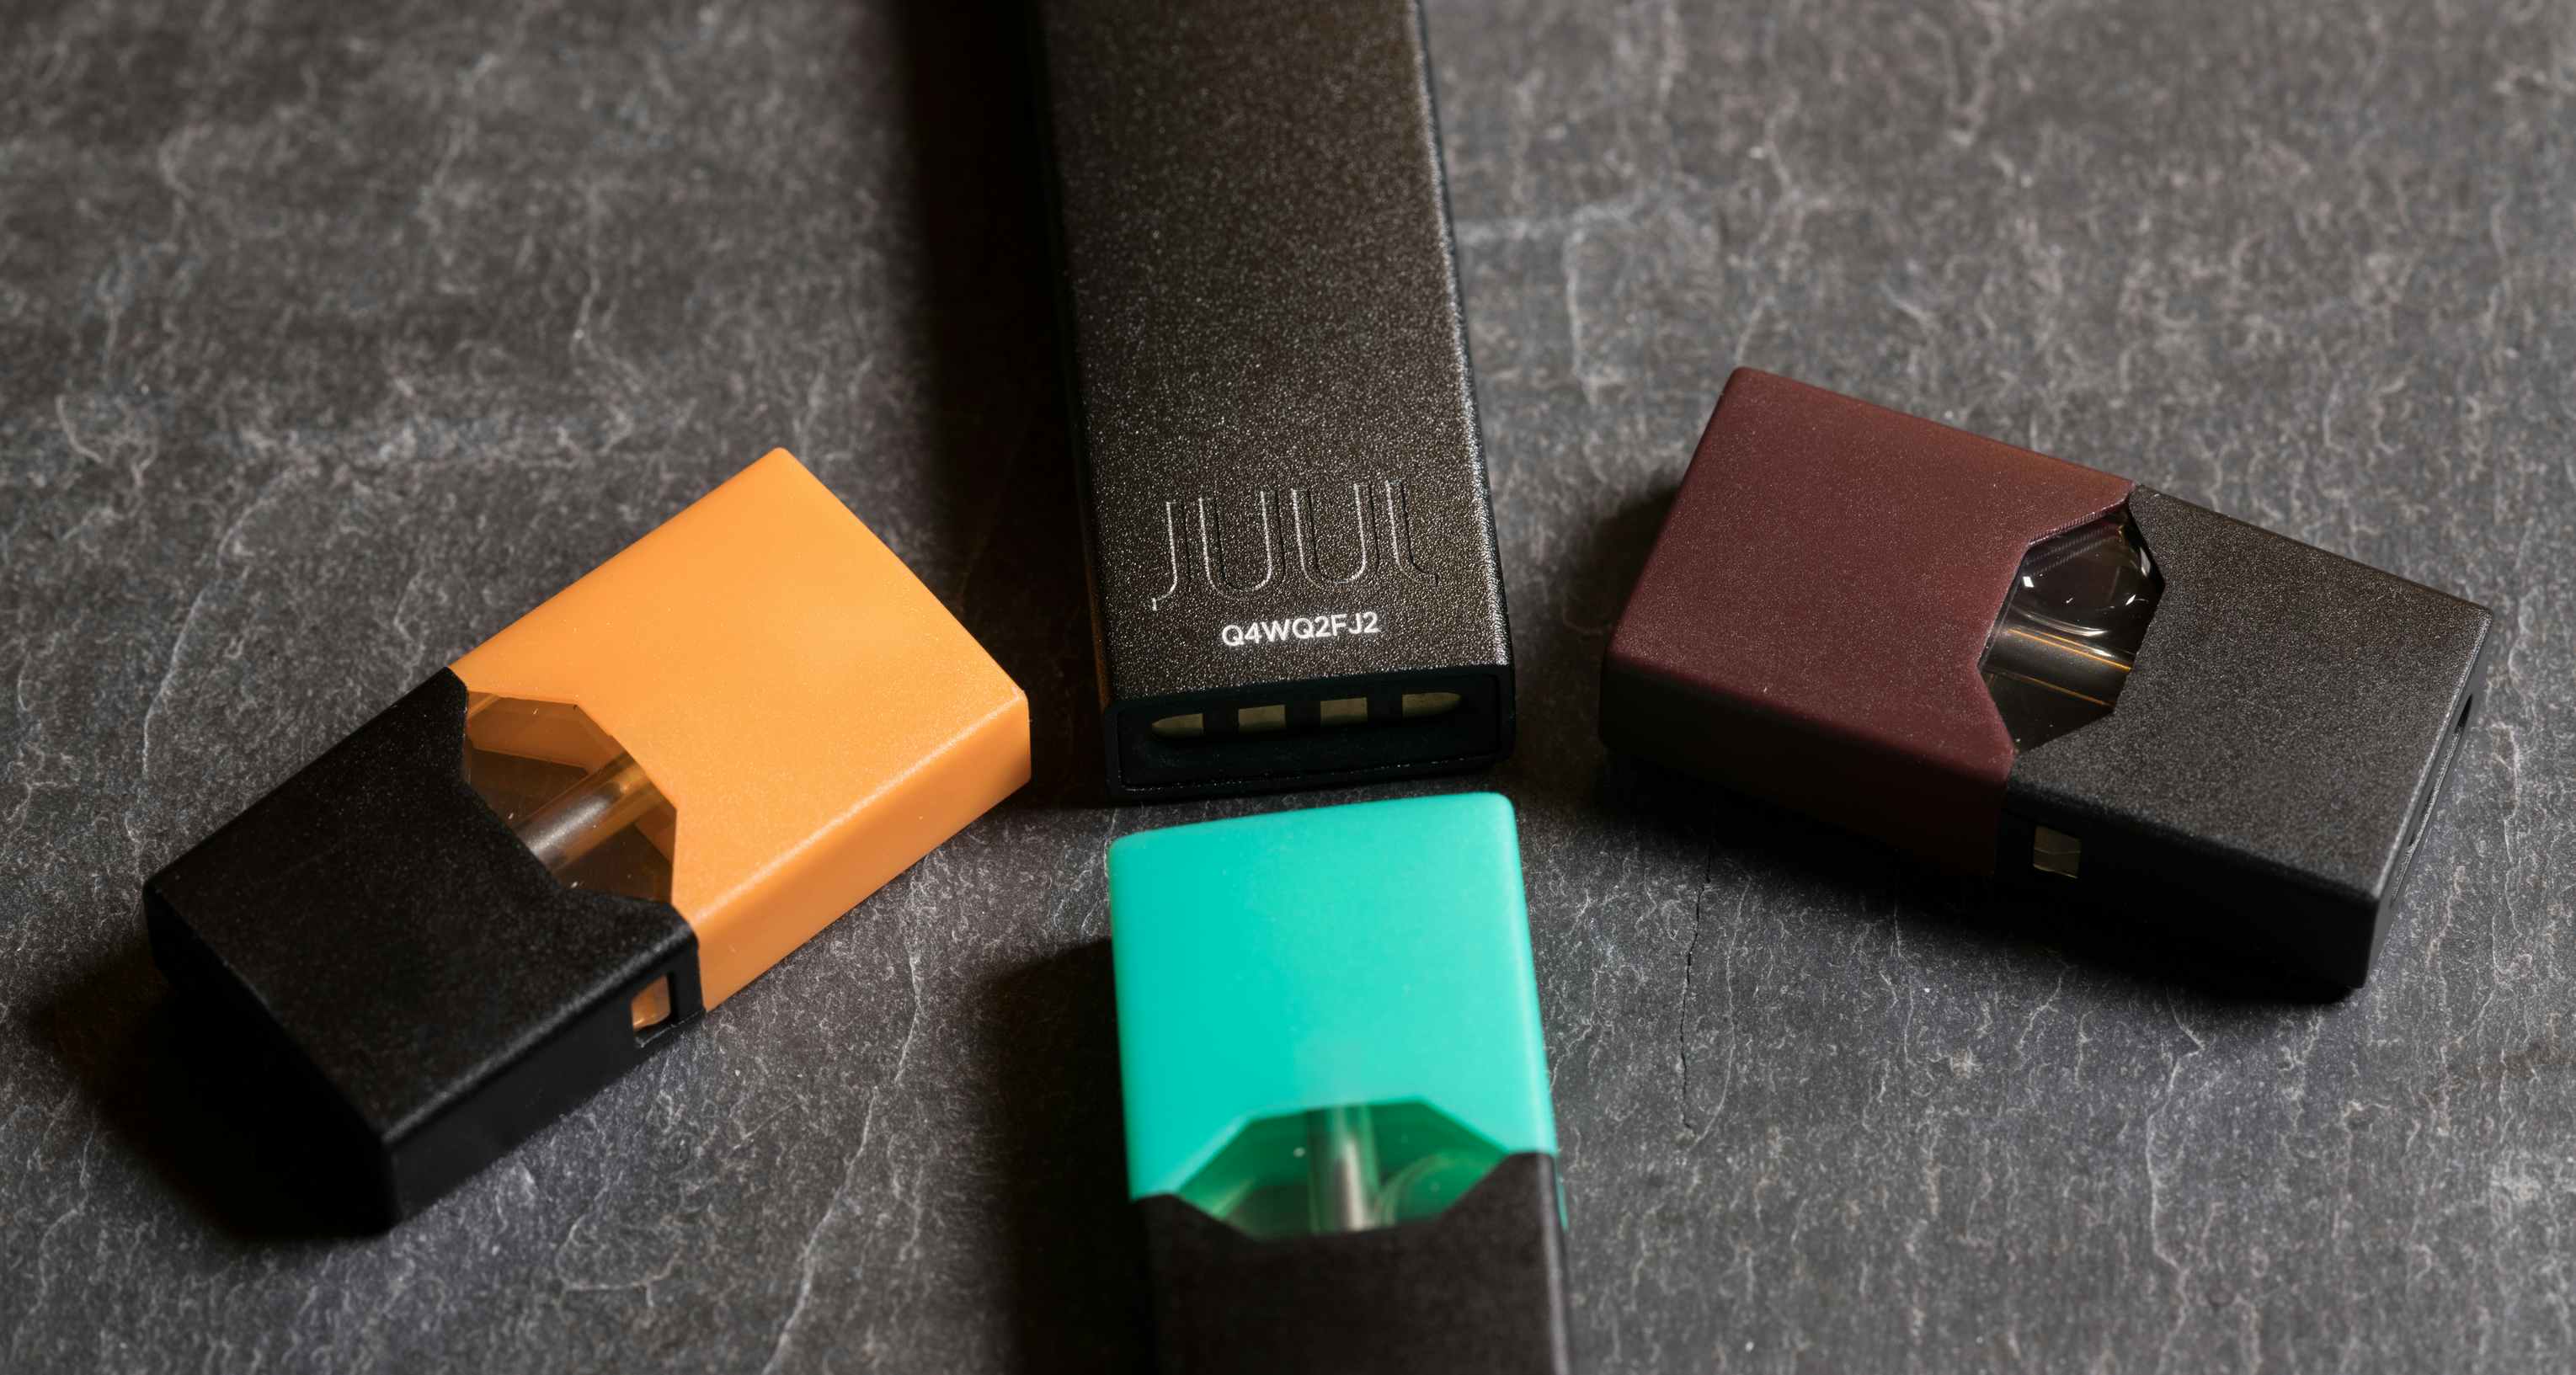 Juul device with different flavored cartridges